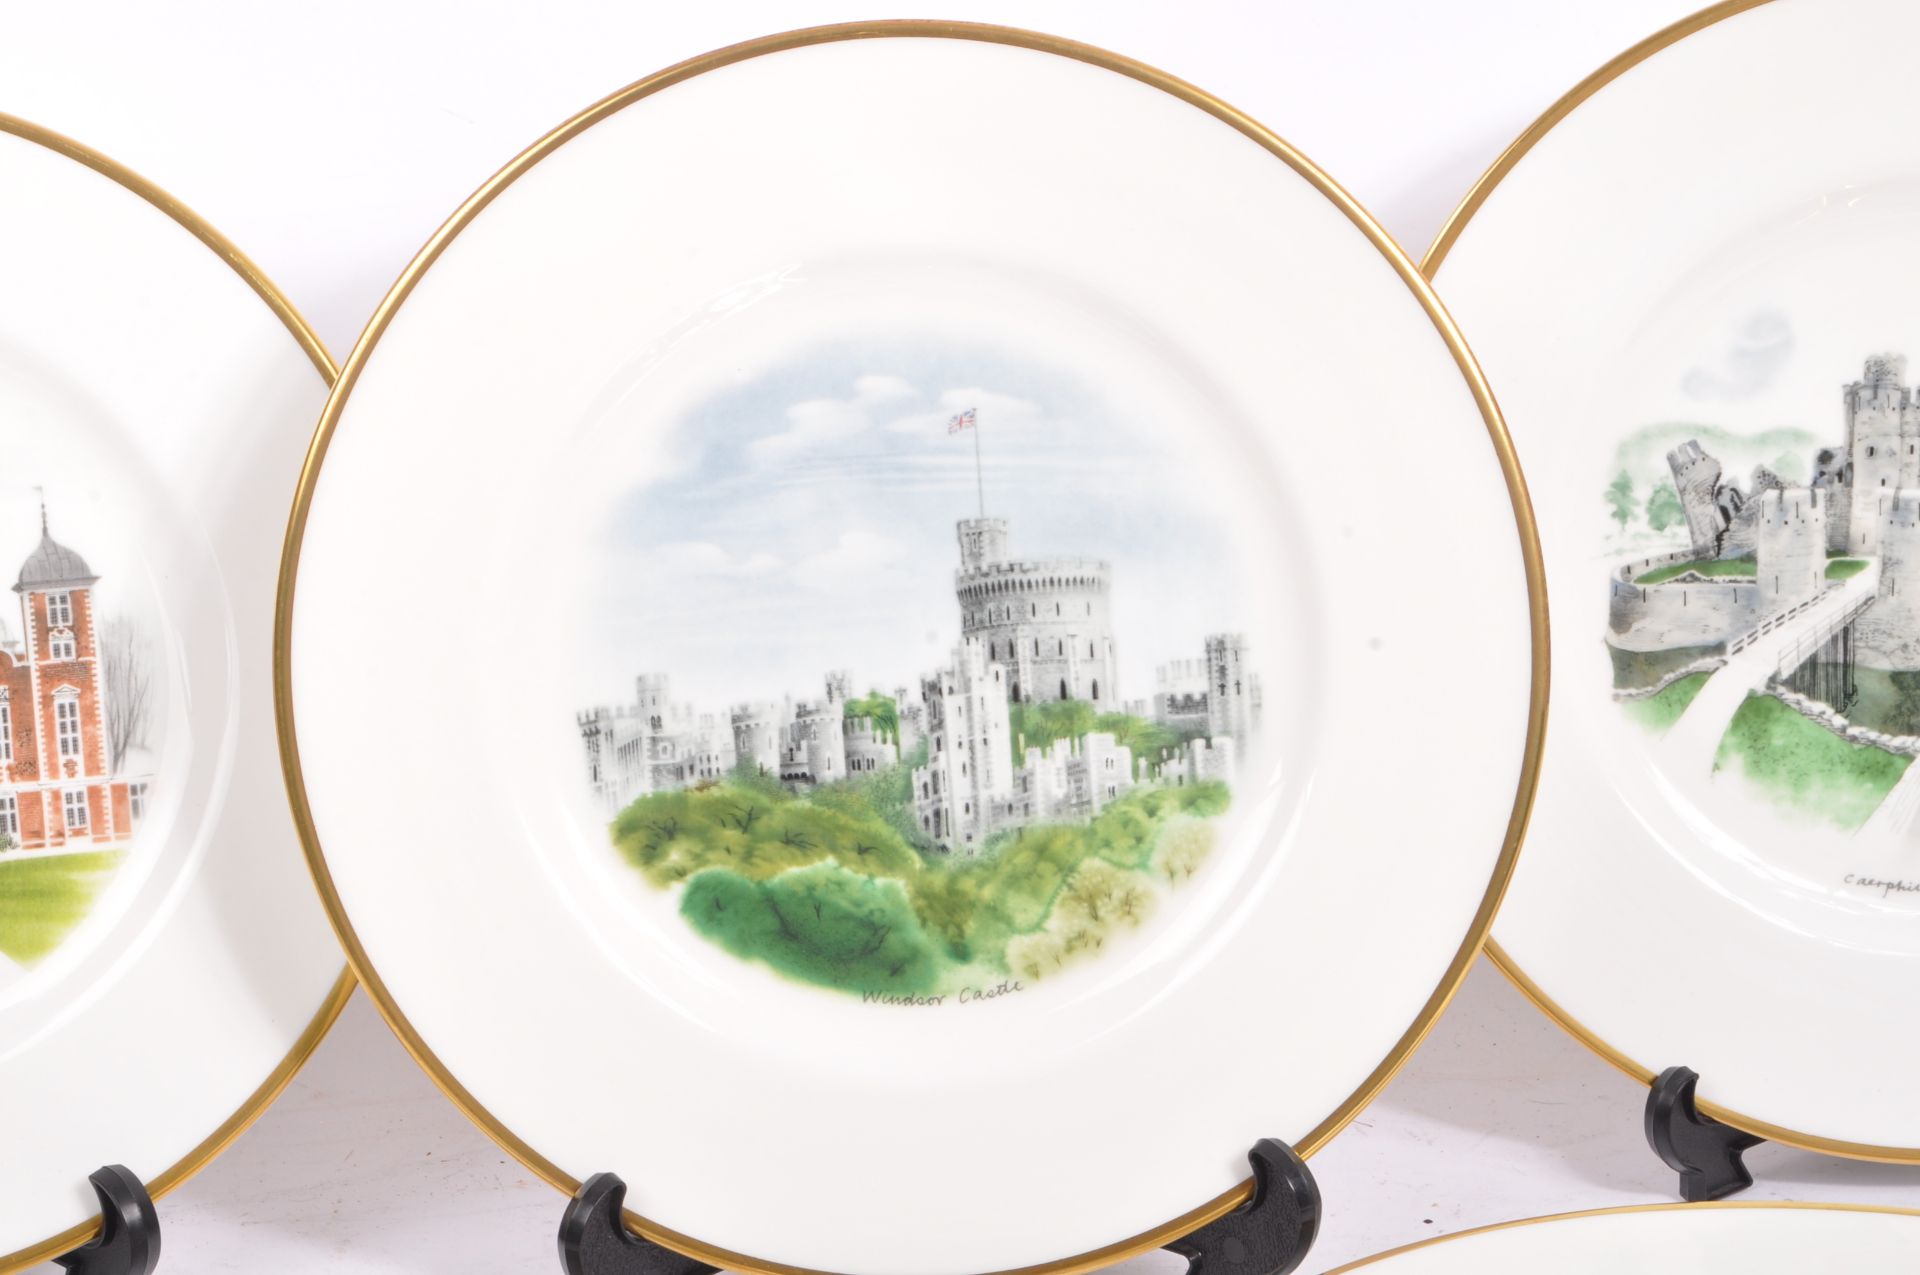 WEDGWOOD - CASTLE & COUNTRY HOUSE PORCELAIN PLATES - Image 3 of 11